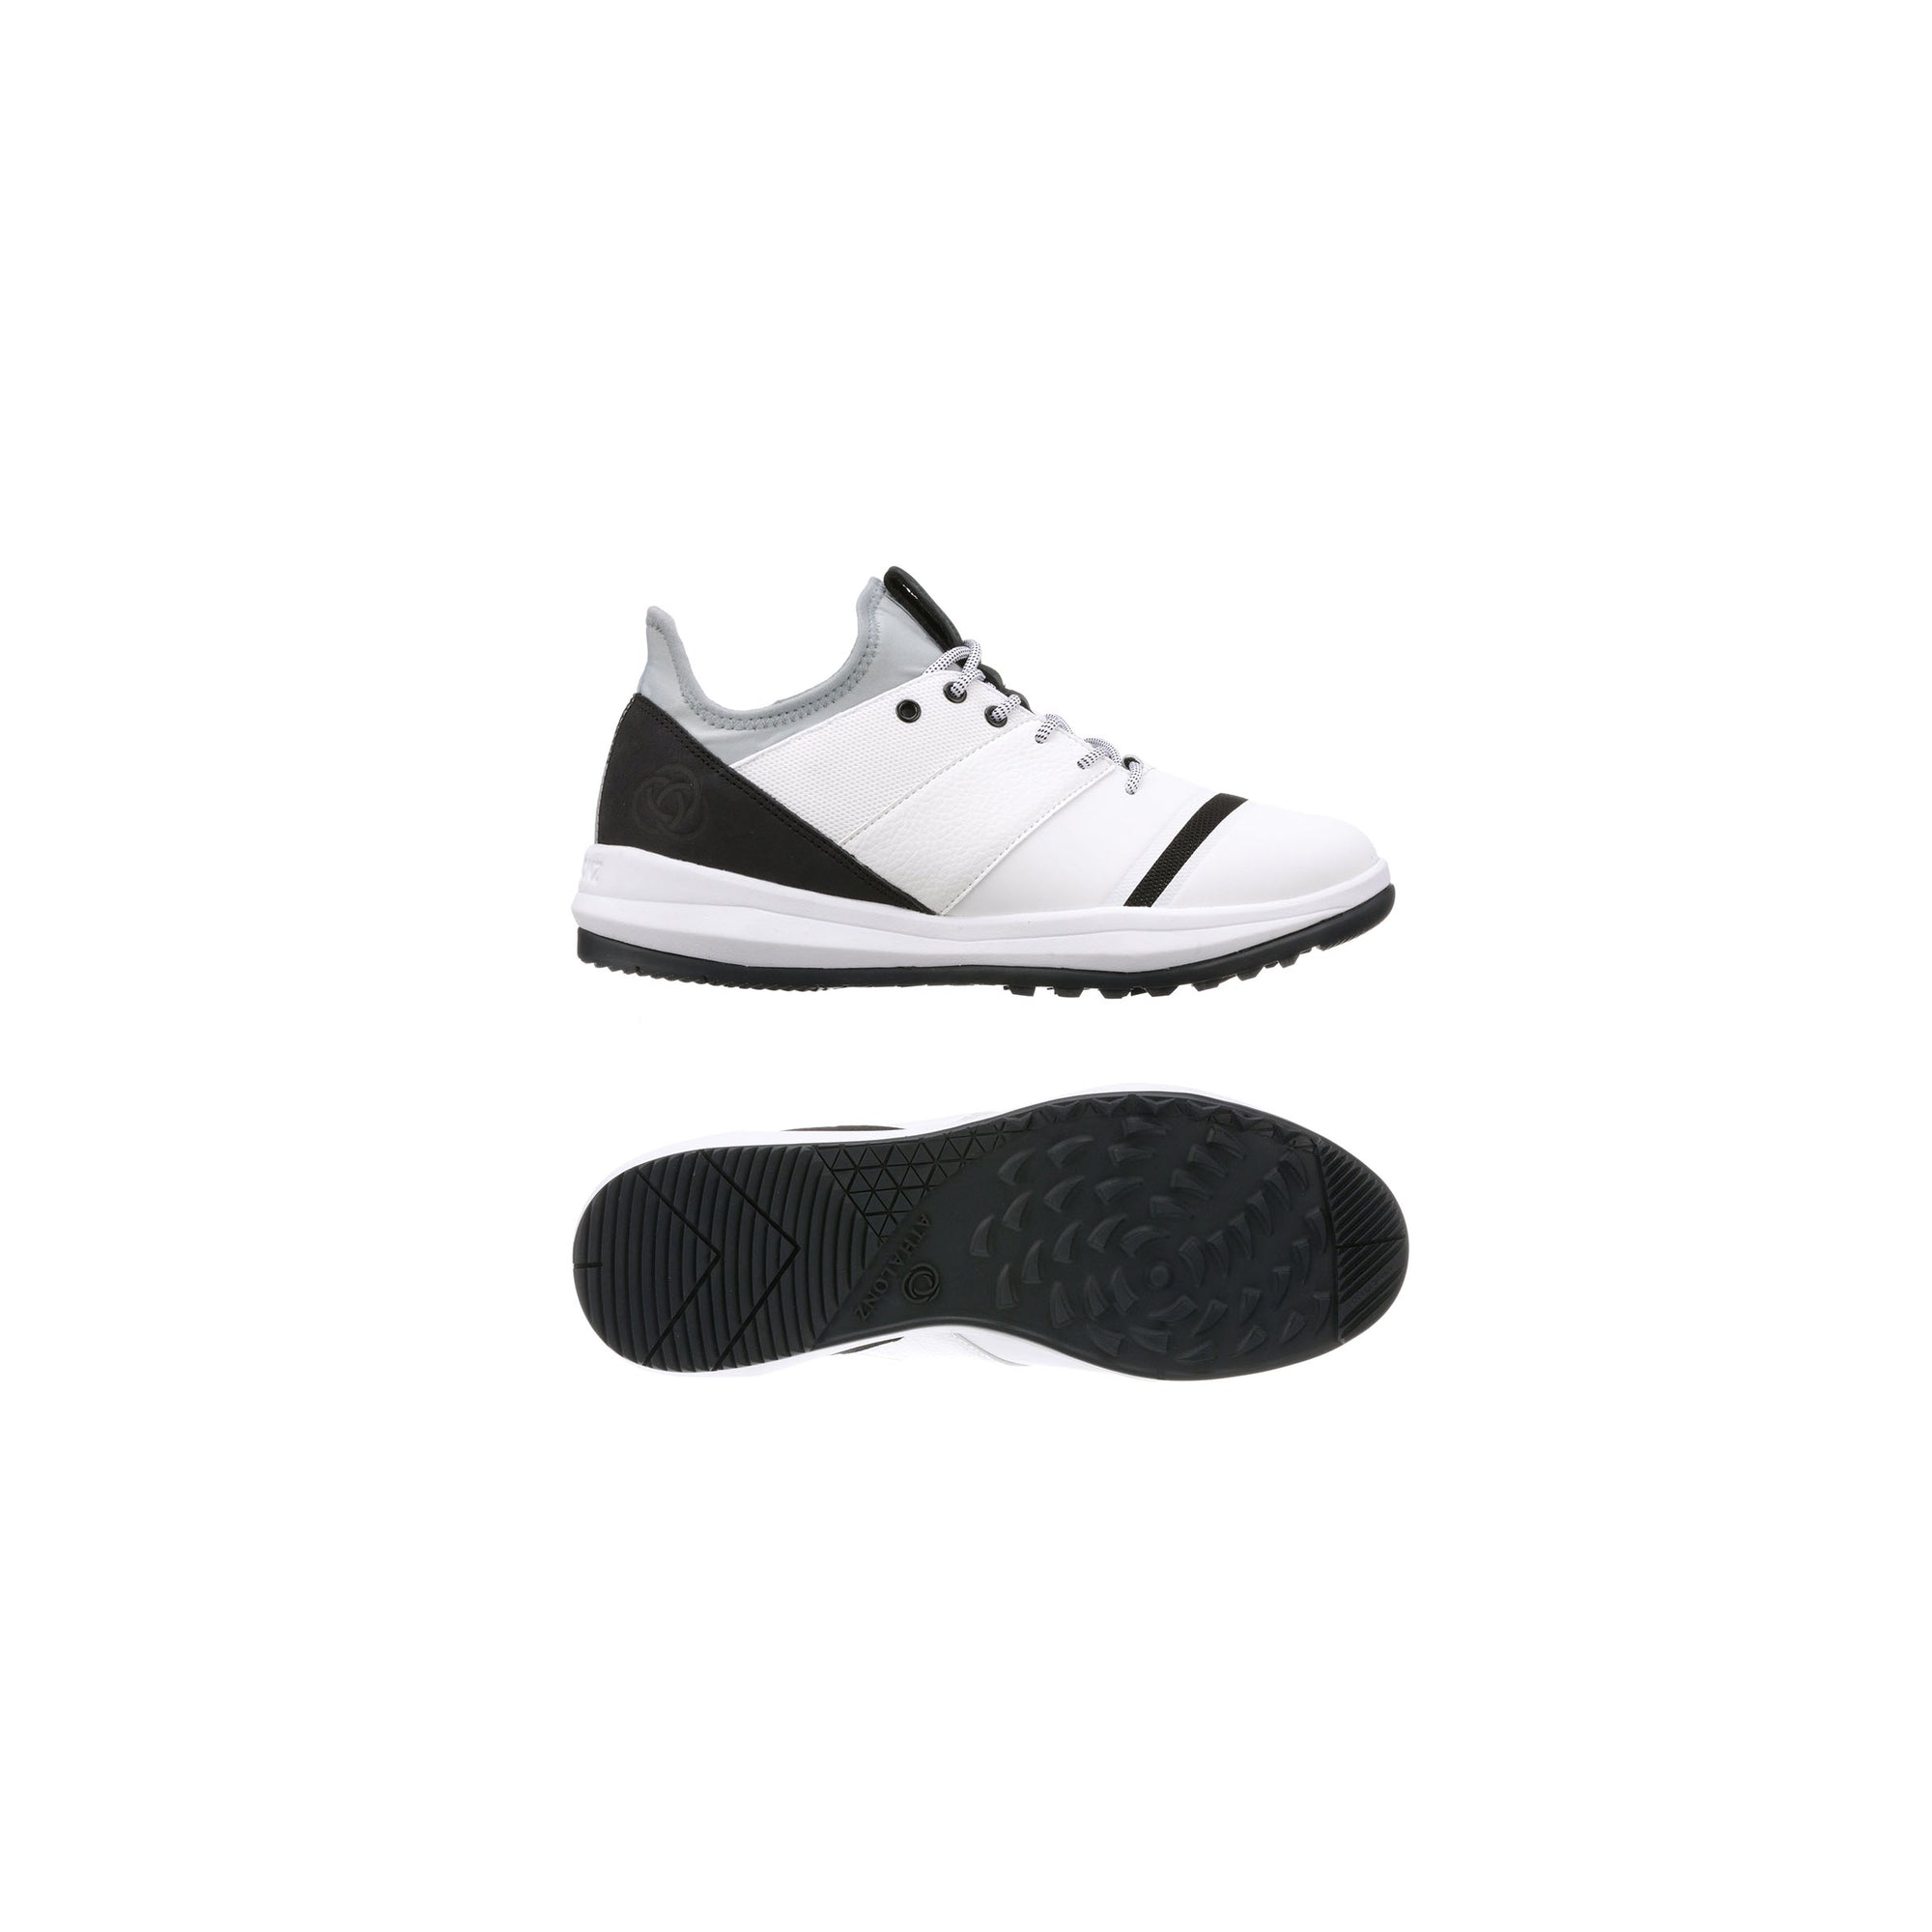 The Three Key Aspects of a Golf Shoe: Part 1